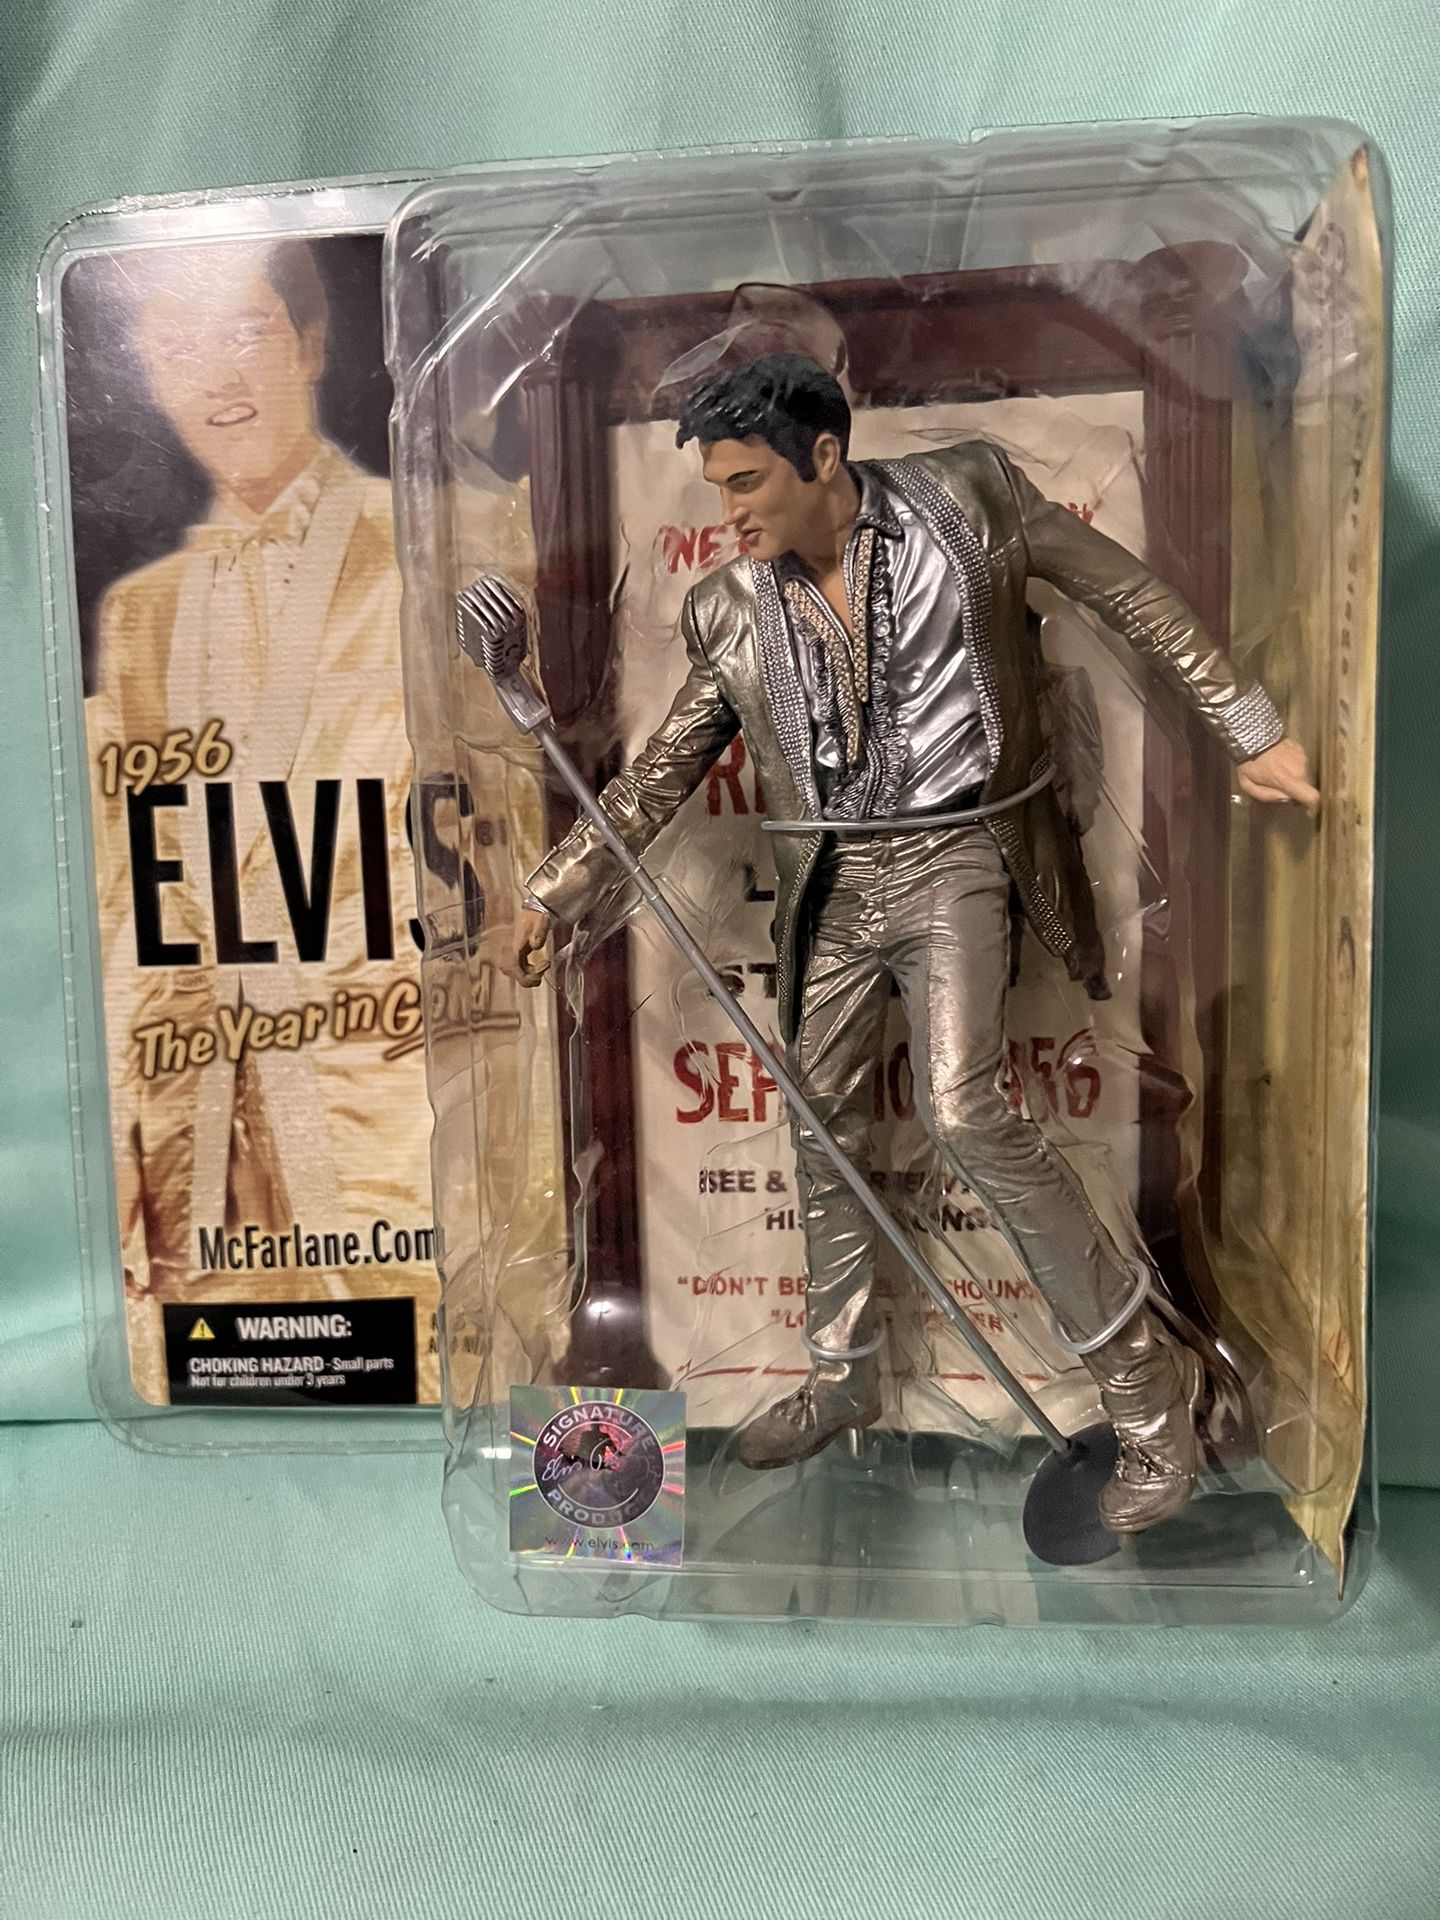 THE YEAR IN GOLD 6'' ACTION FIGURE 2005 McFARLANE ELVIS PRESLEY 6'' COLLECTION SERIES 4